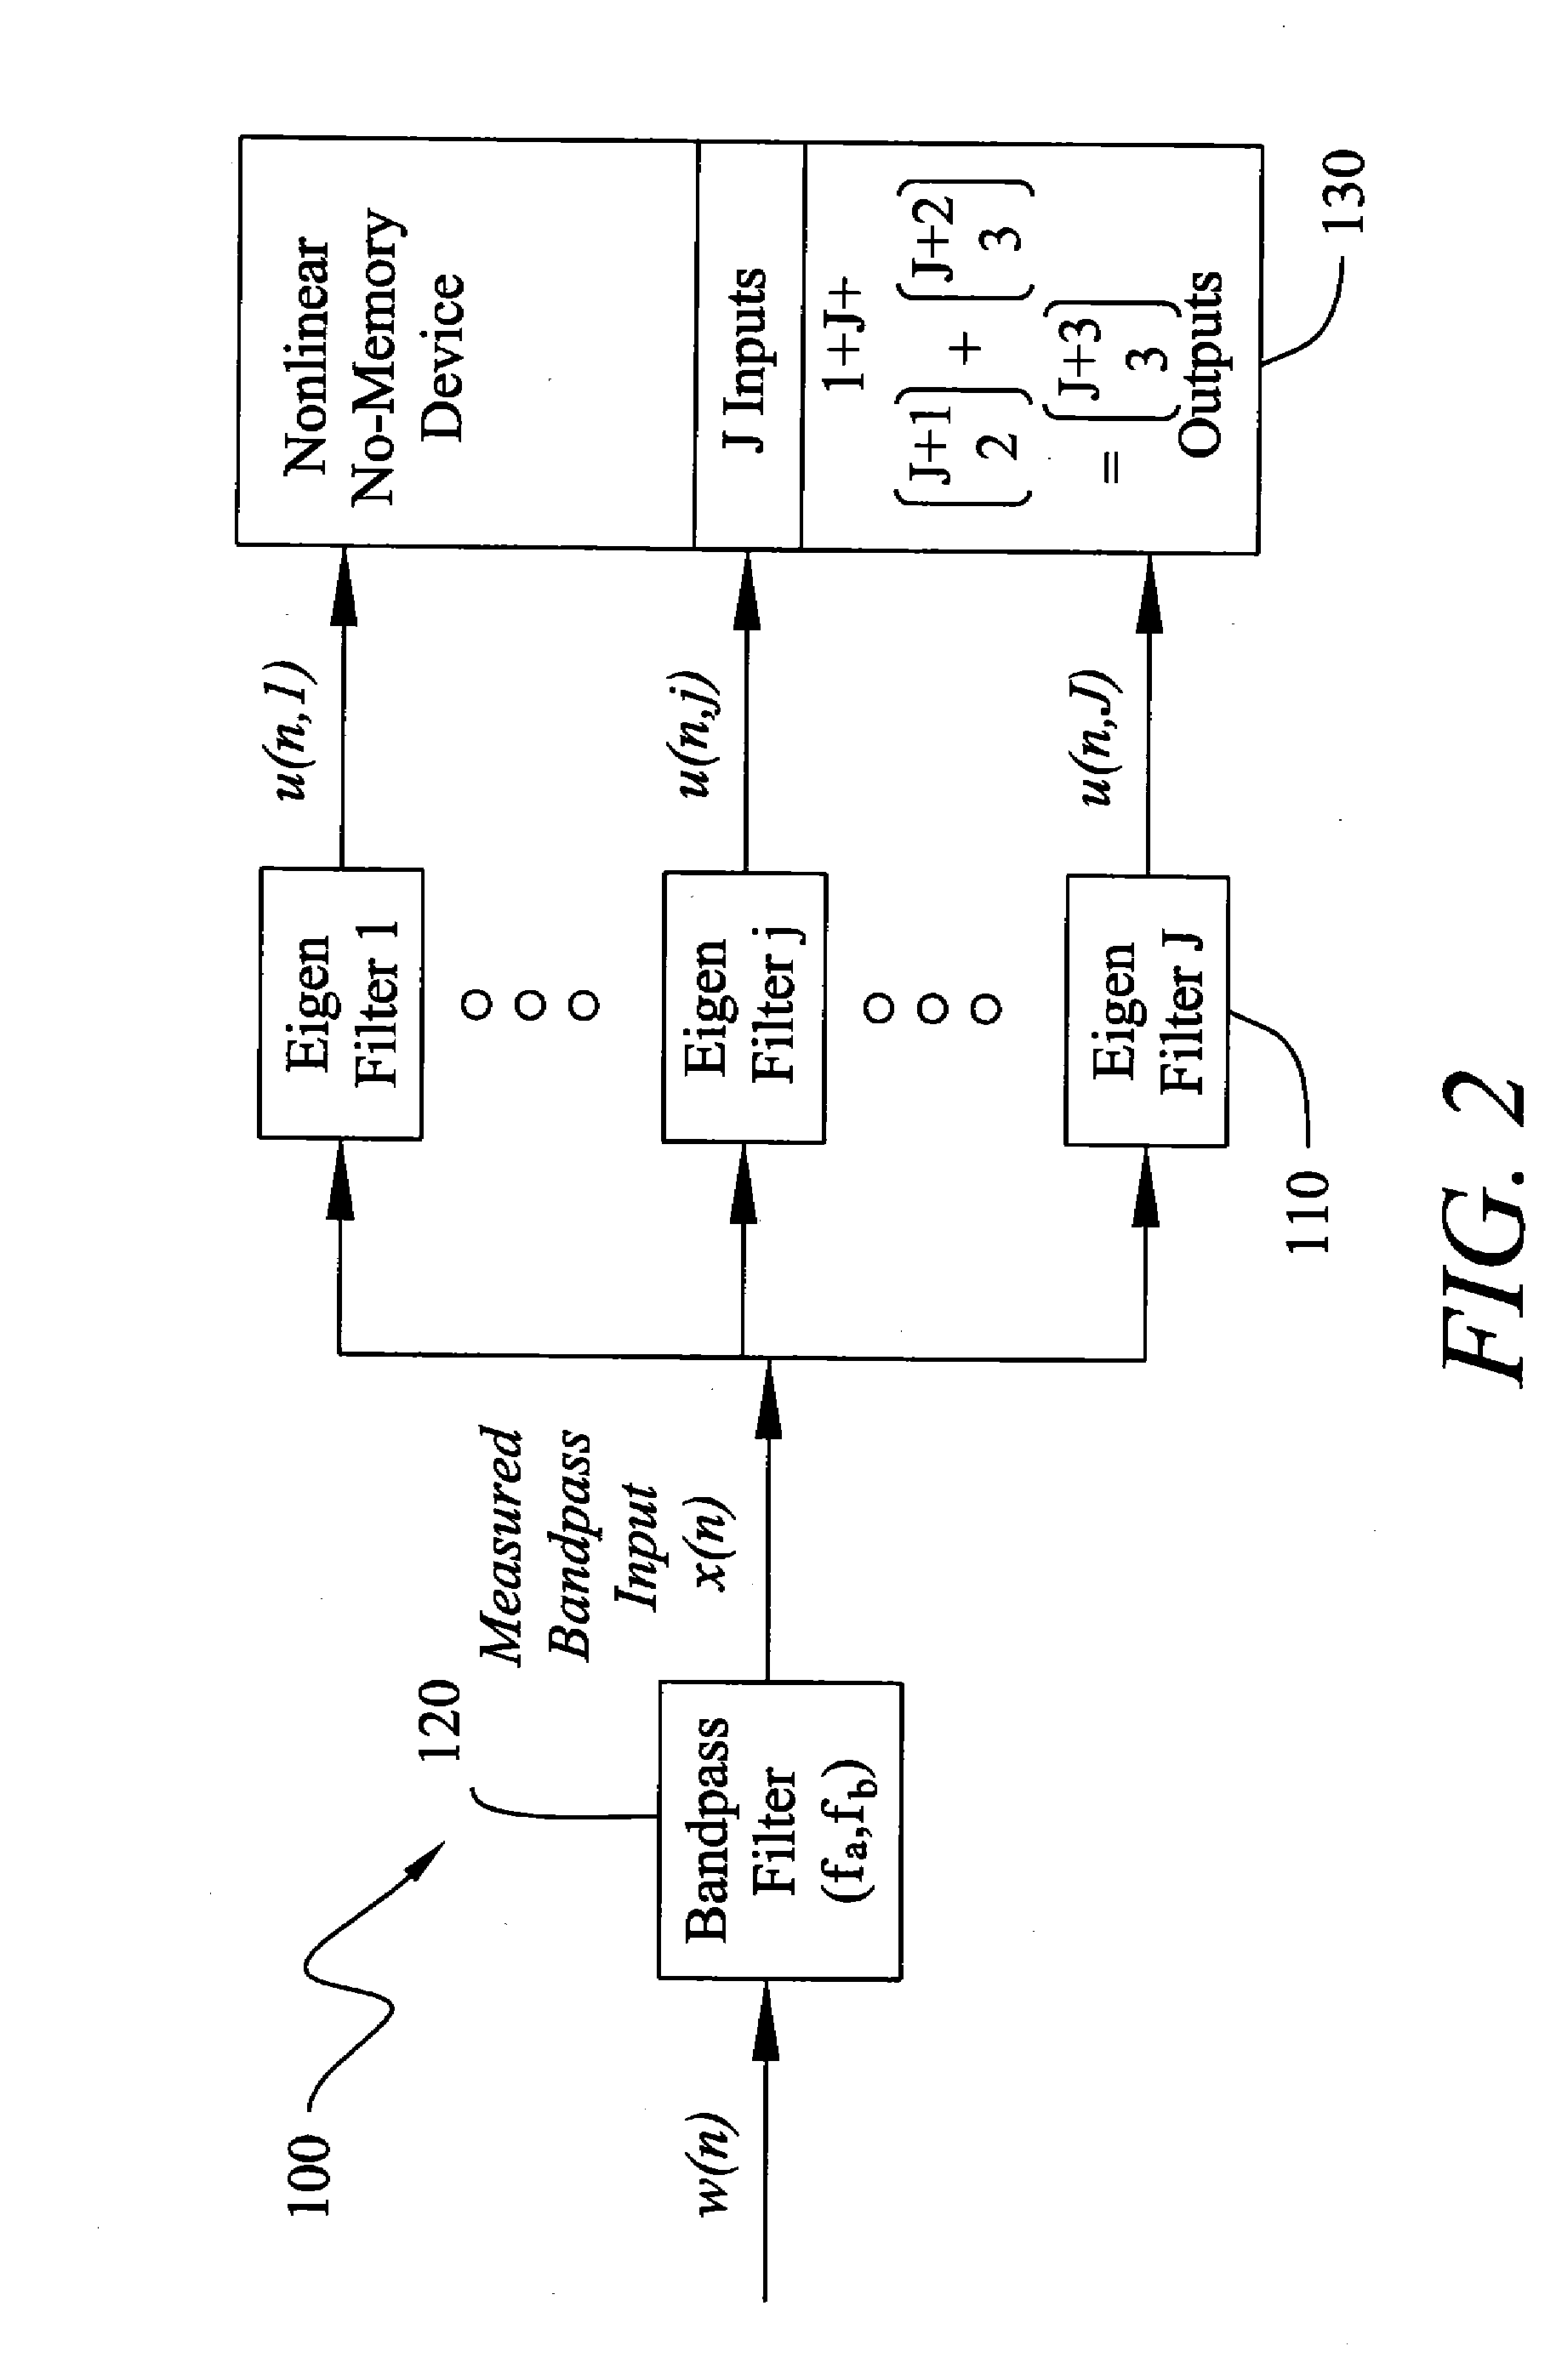 Method and Apparatus for Improved Active Sonar Using Singular Value Decomposition Filtering